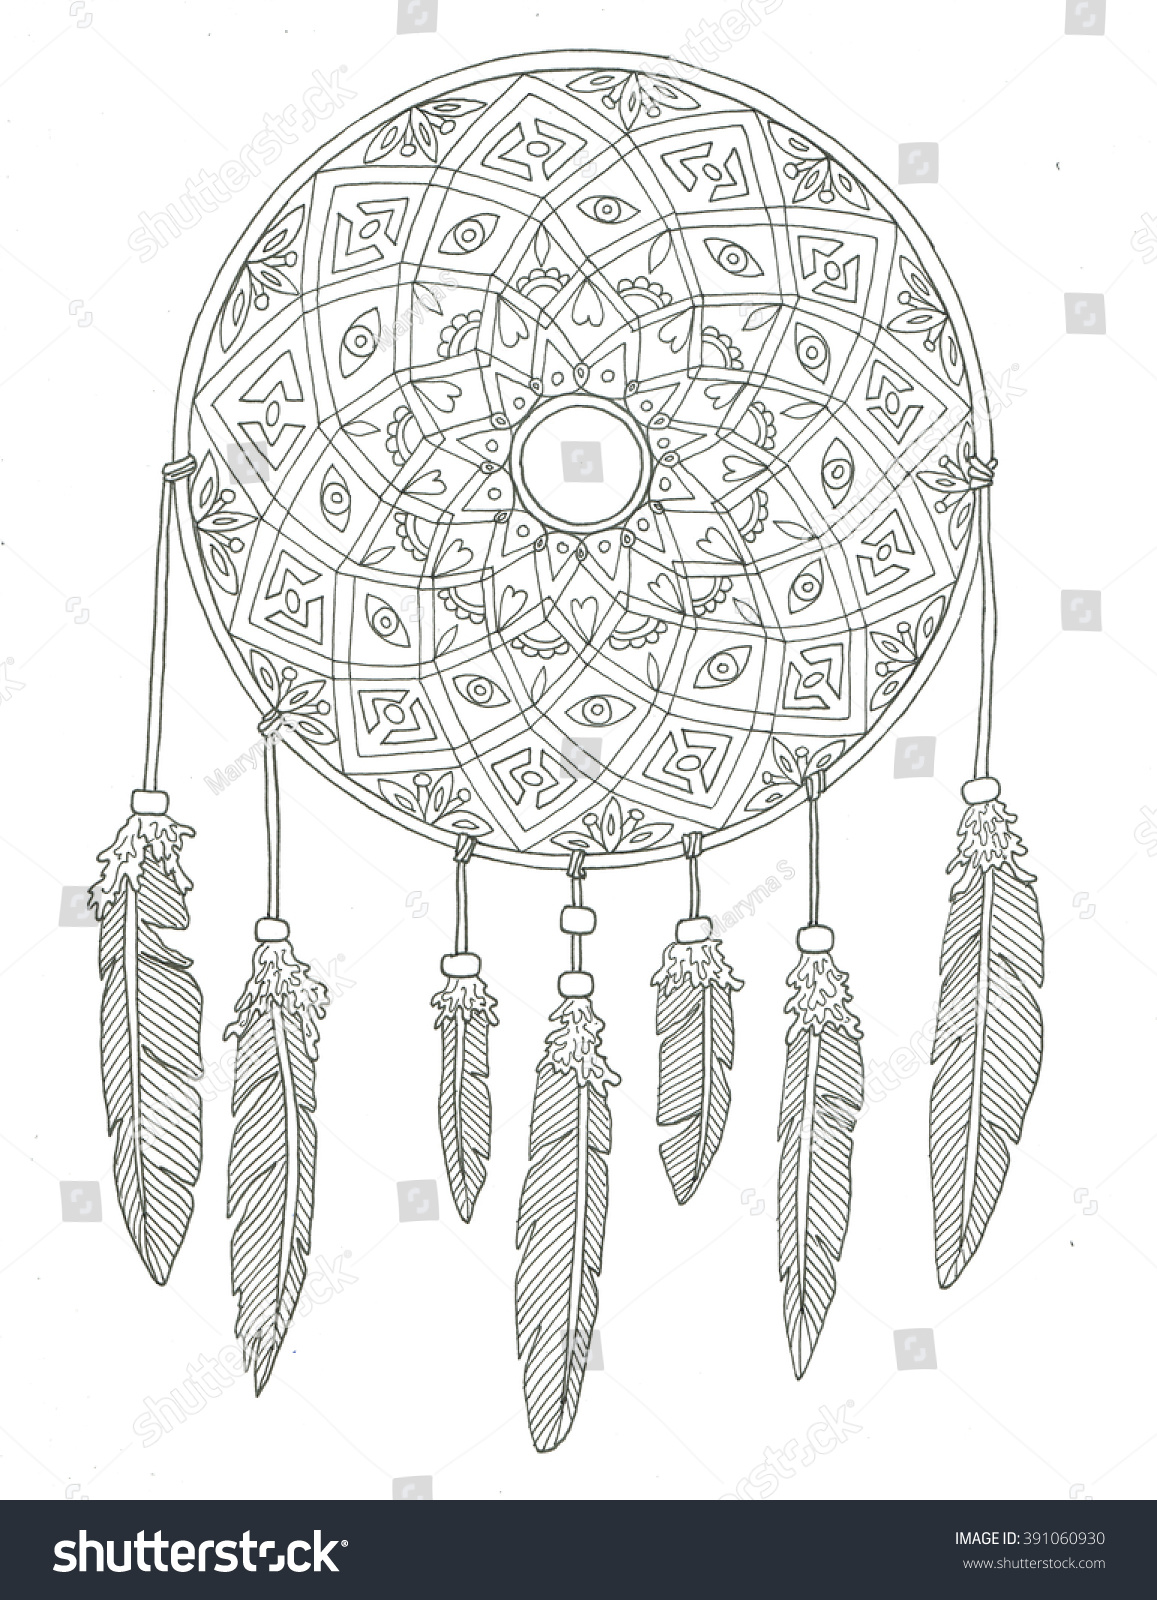 dream catcher printable coloring page adult by moondrawarts